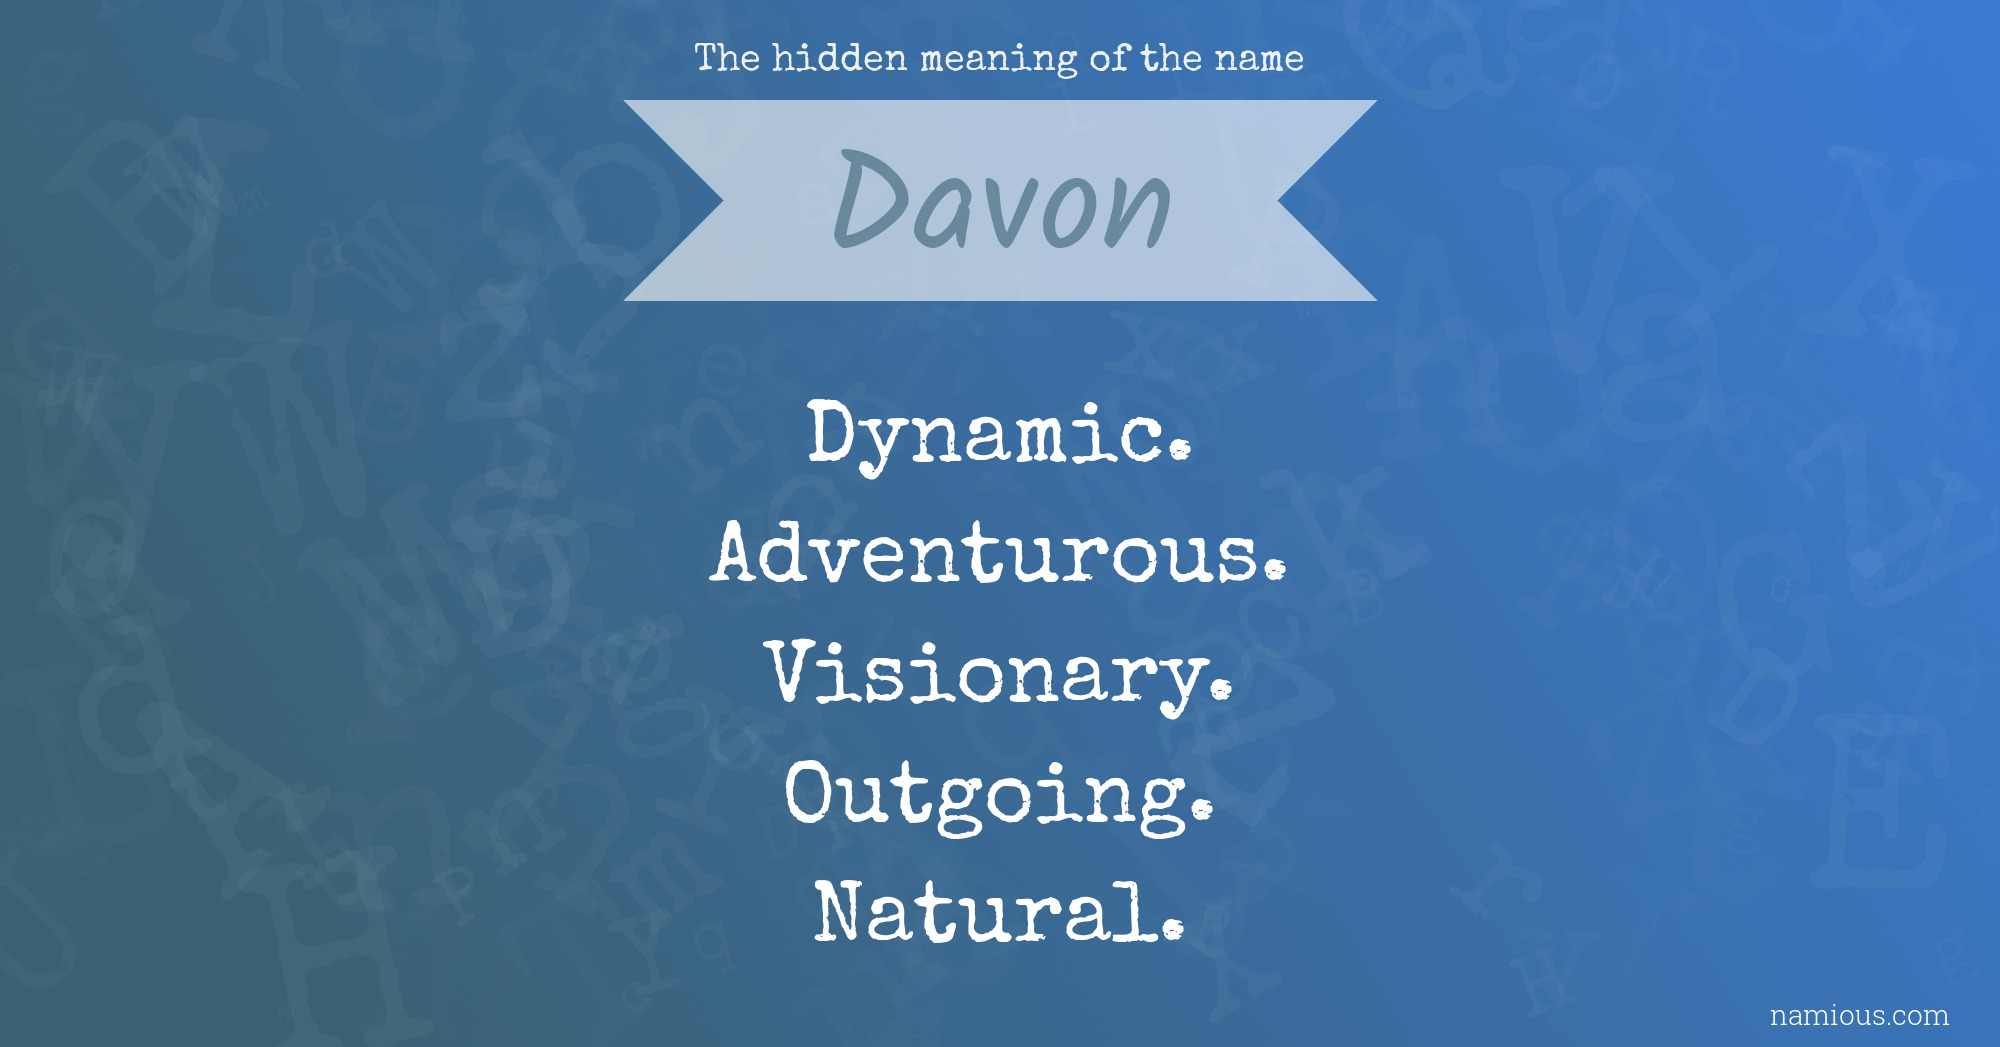 The hidden meaning of the name Davon